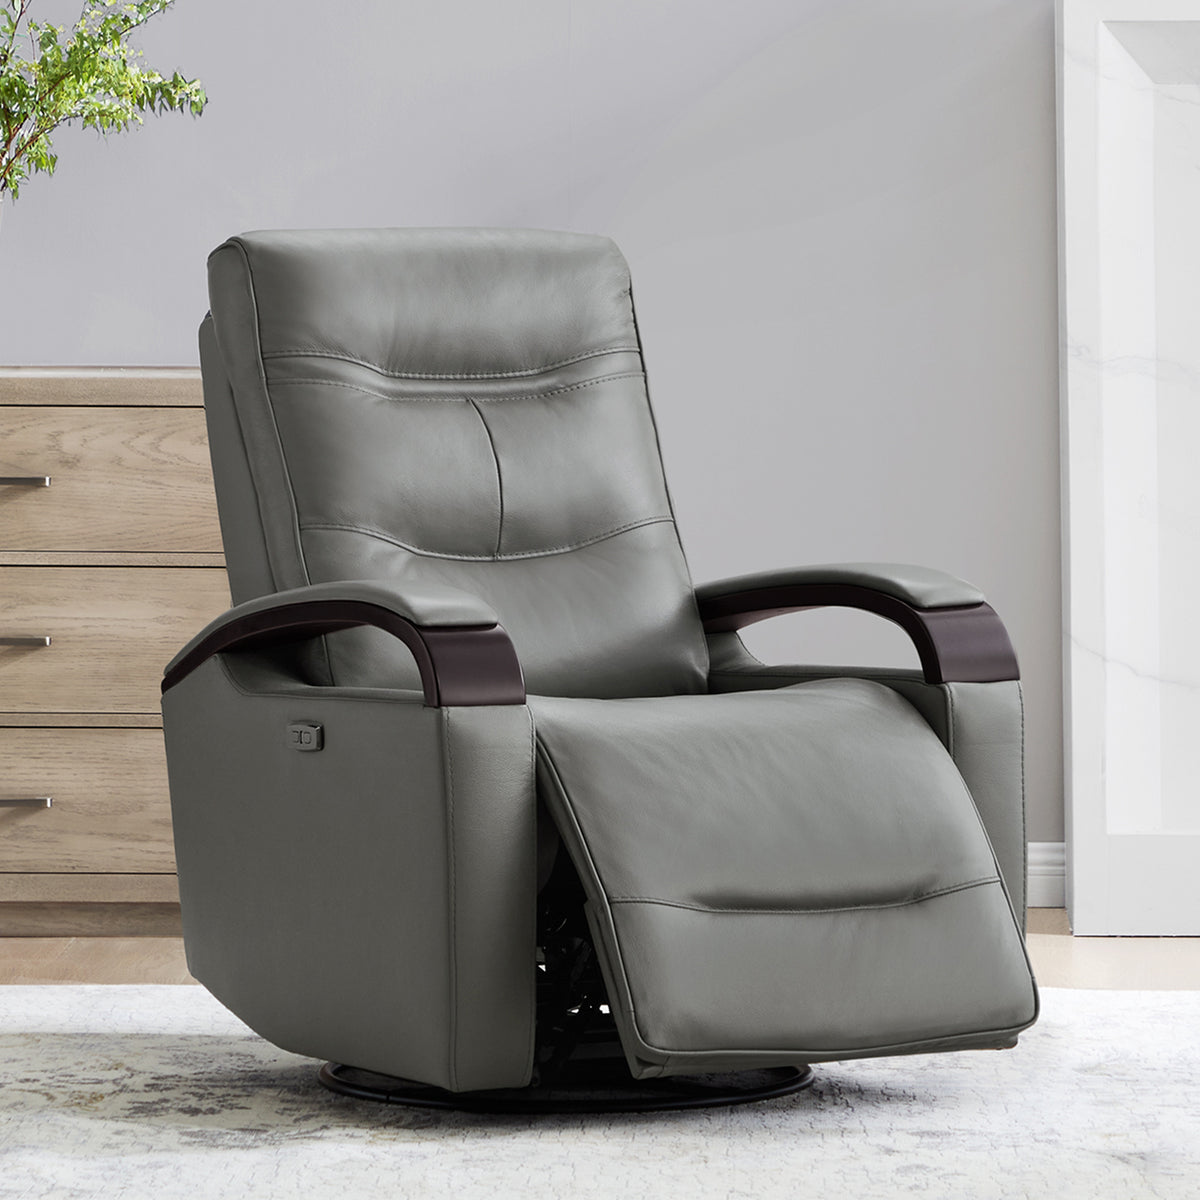 Gentry power swivel recliner chairs